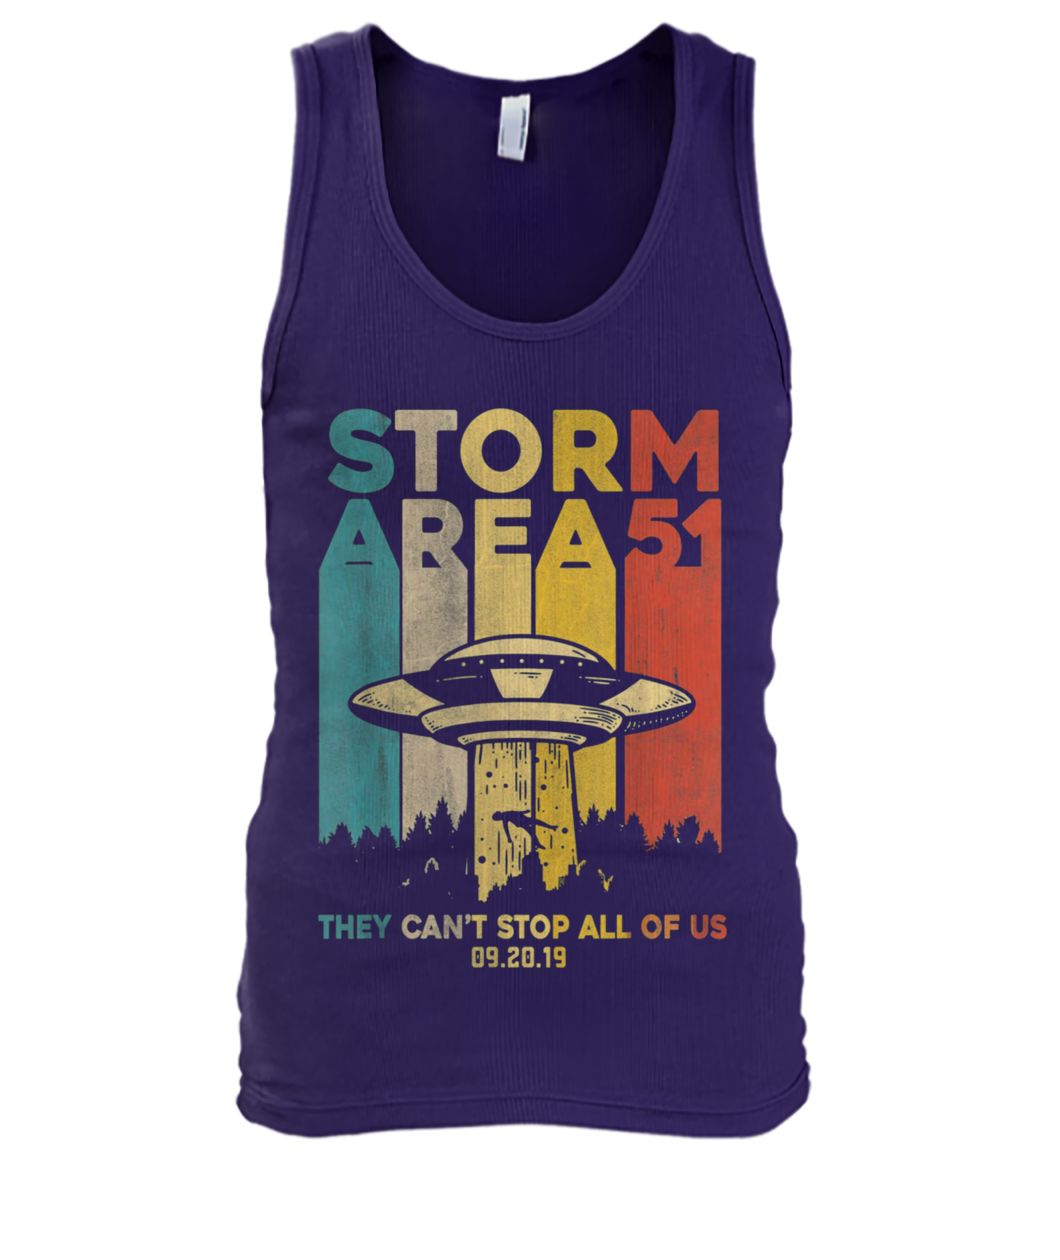 Storm area 51 alien ufo they cant stop us vintage men's tank top